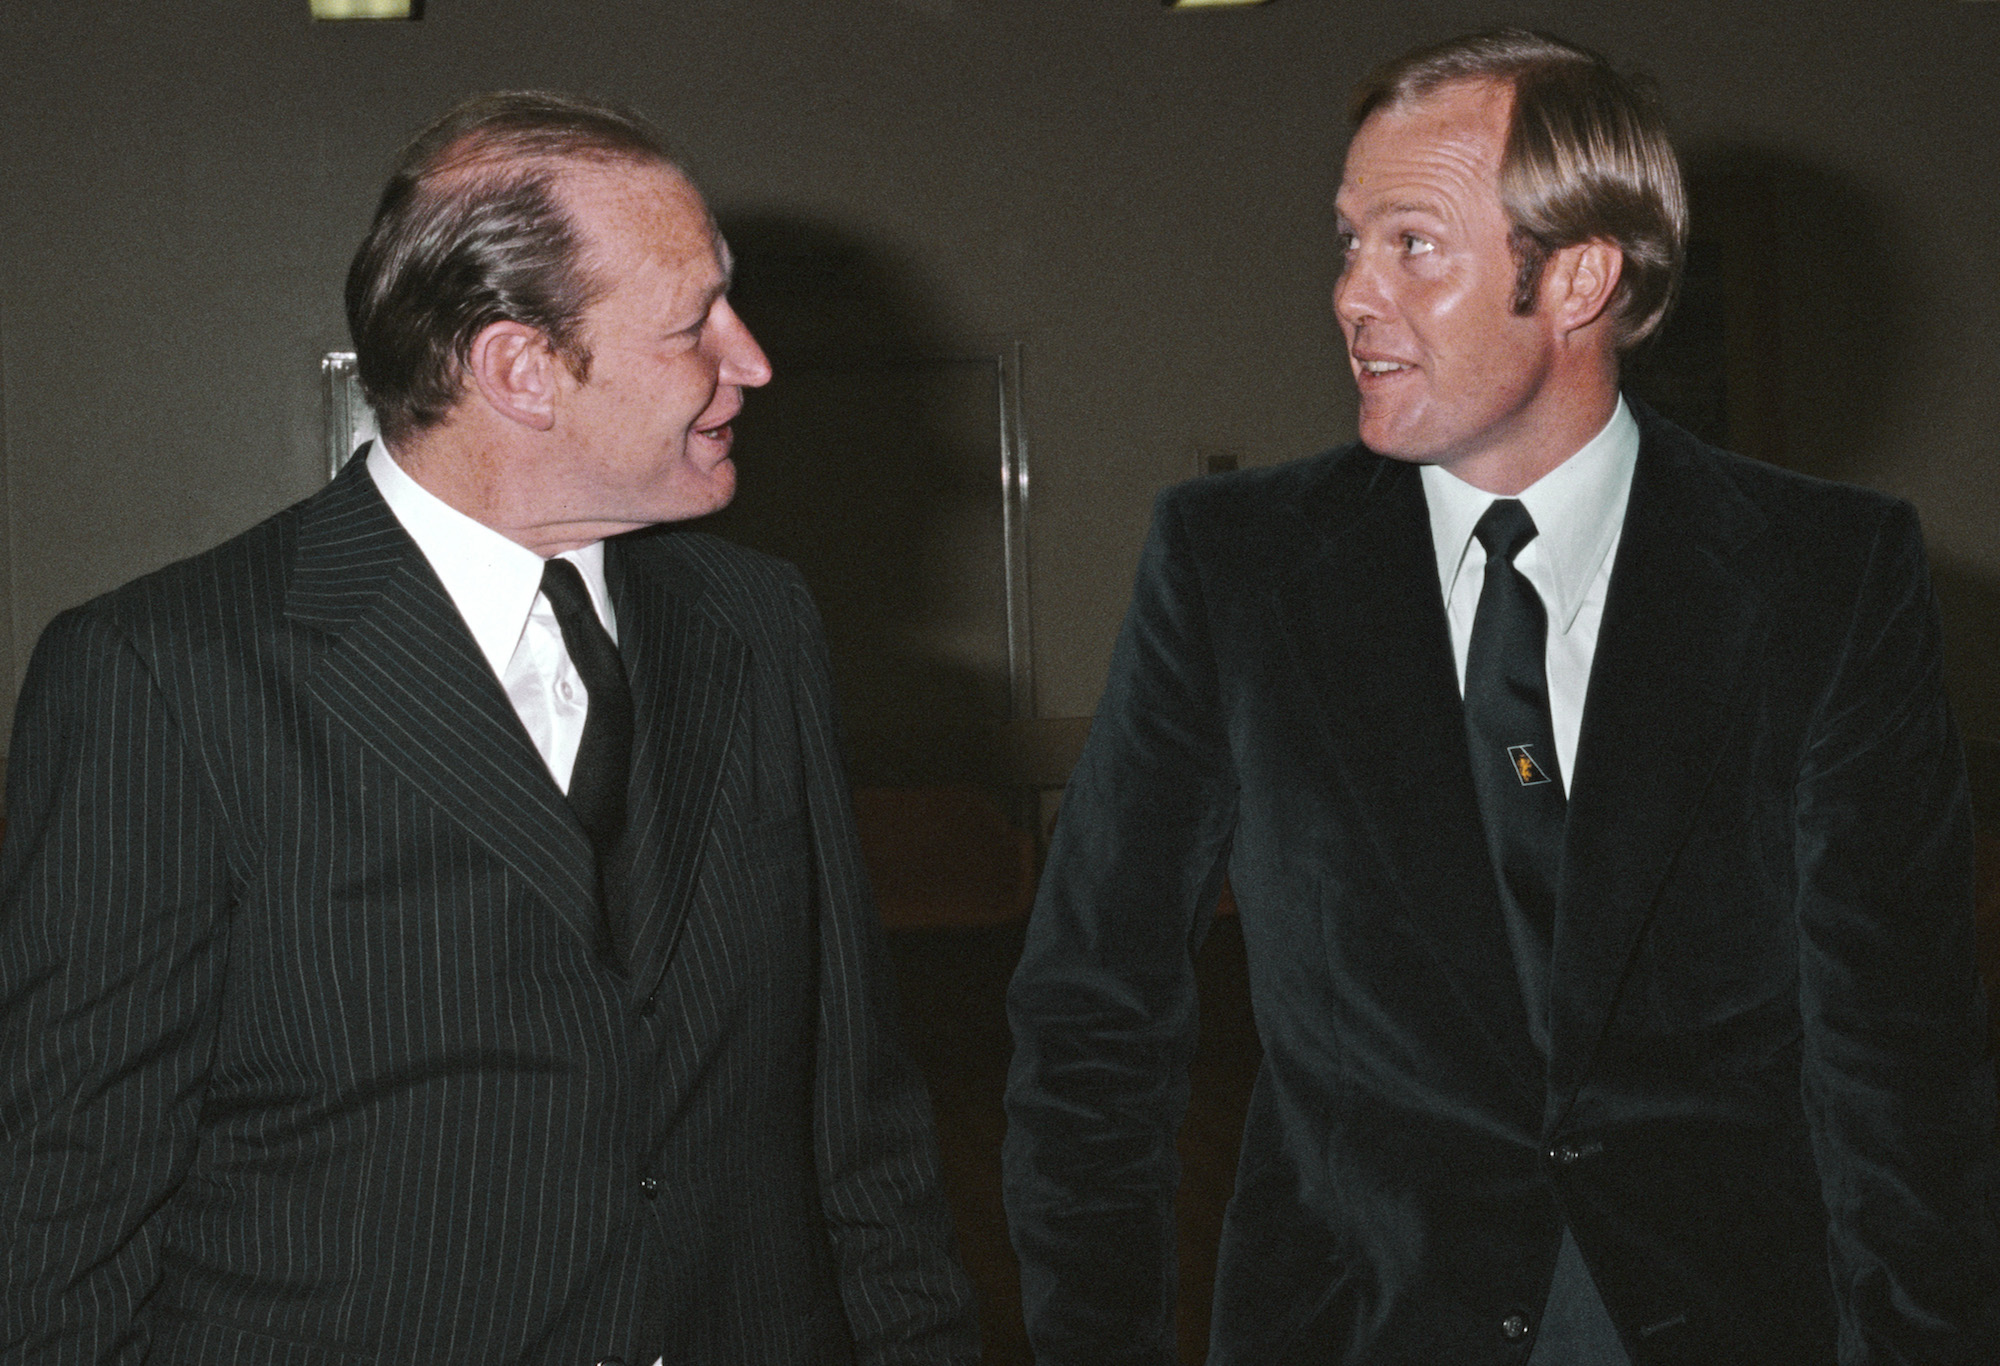 Kerry Packer and Tony Greig